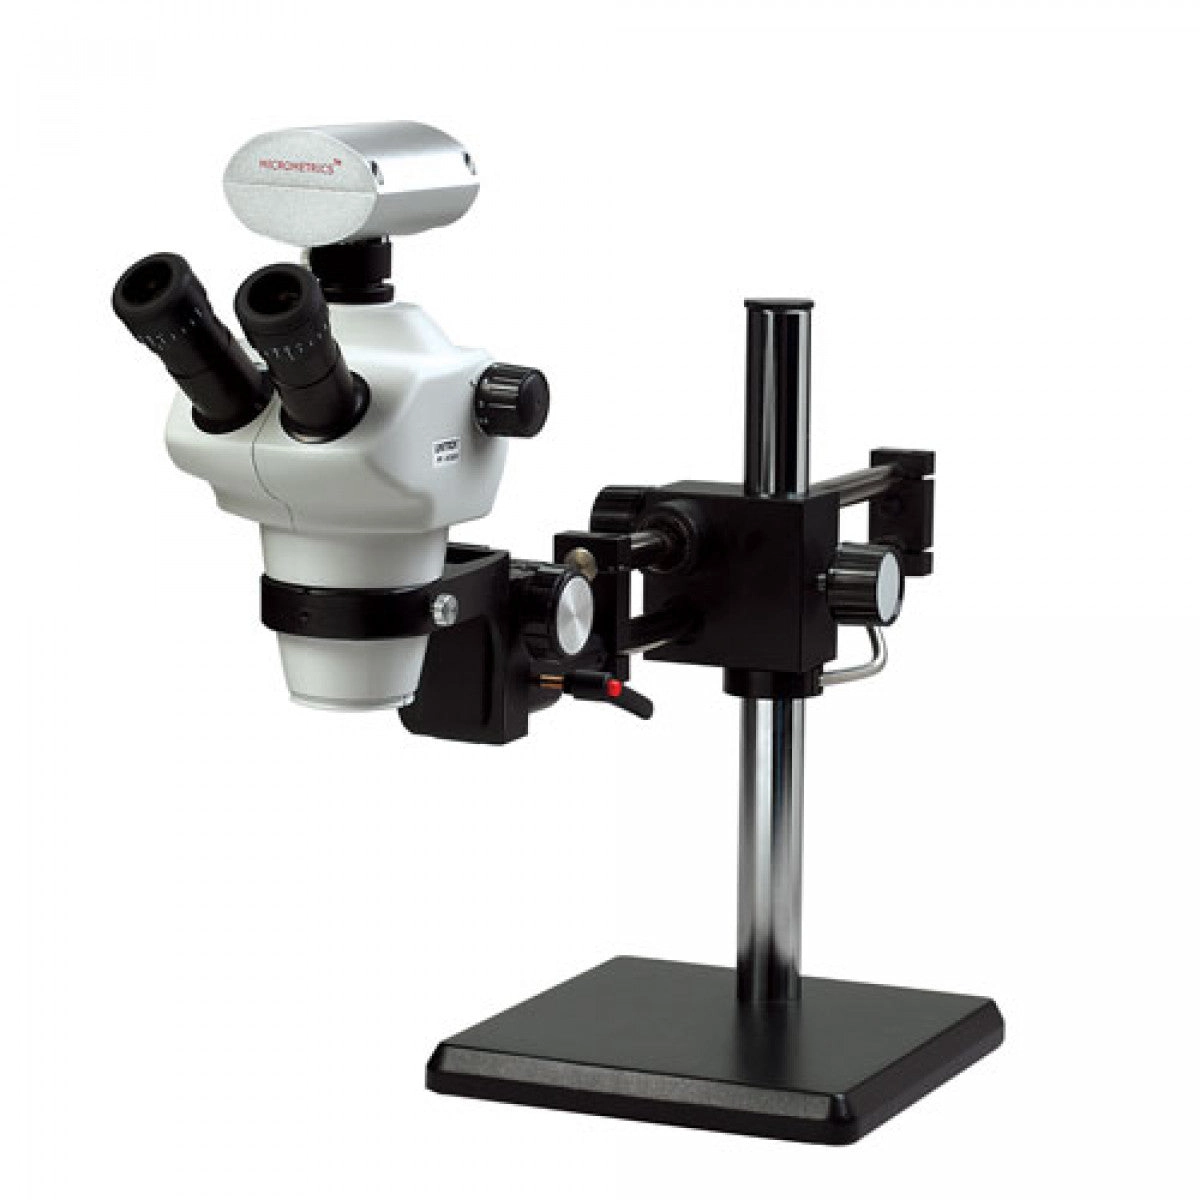 Unitron Z850 Zoom Stereo Microscope On Ball Bearing Boom Stand